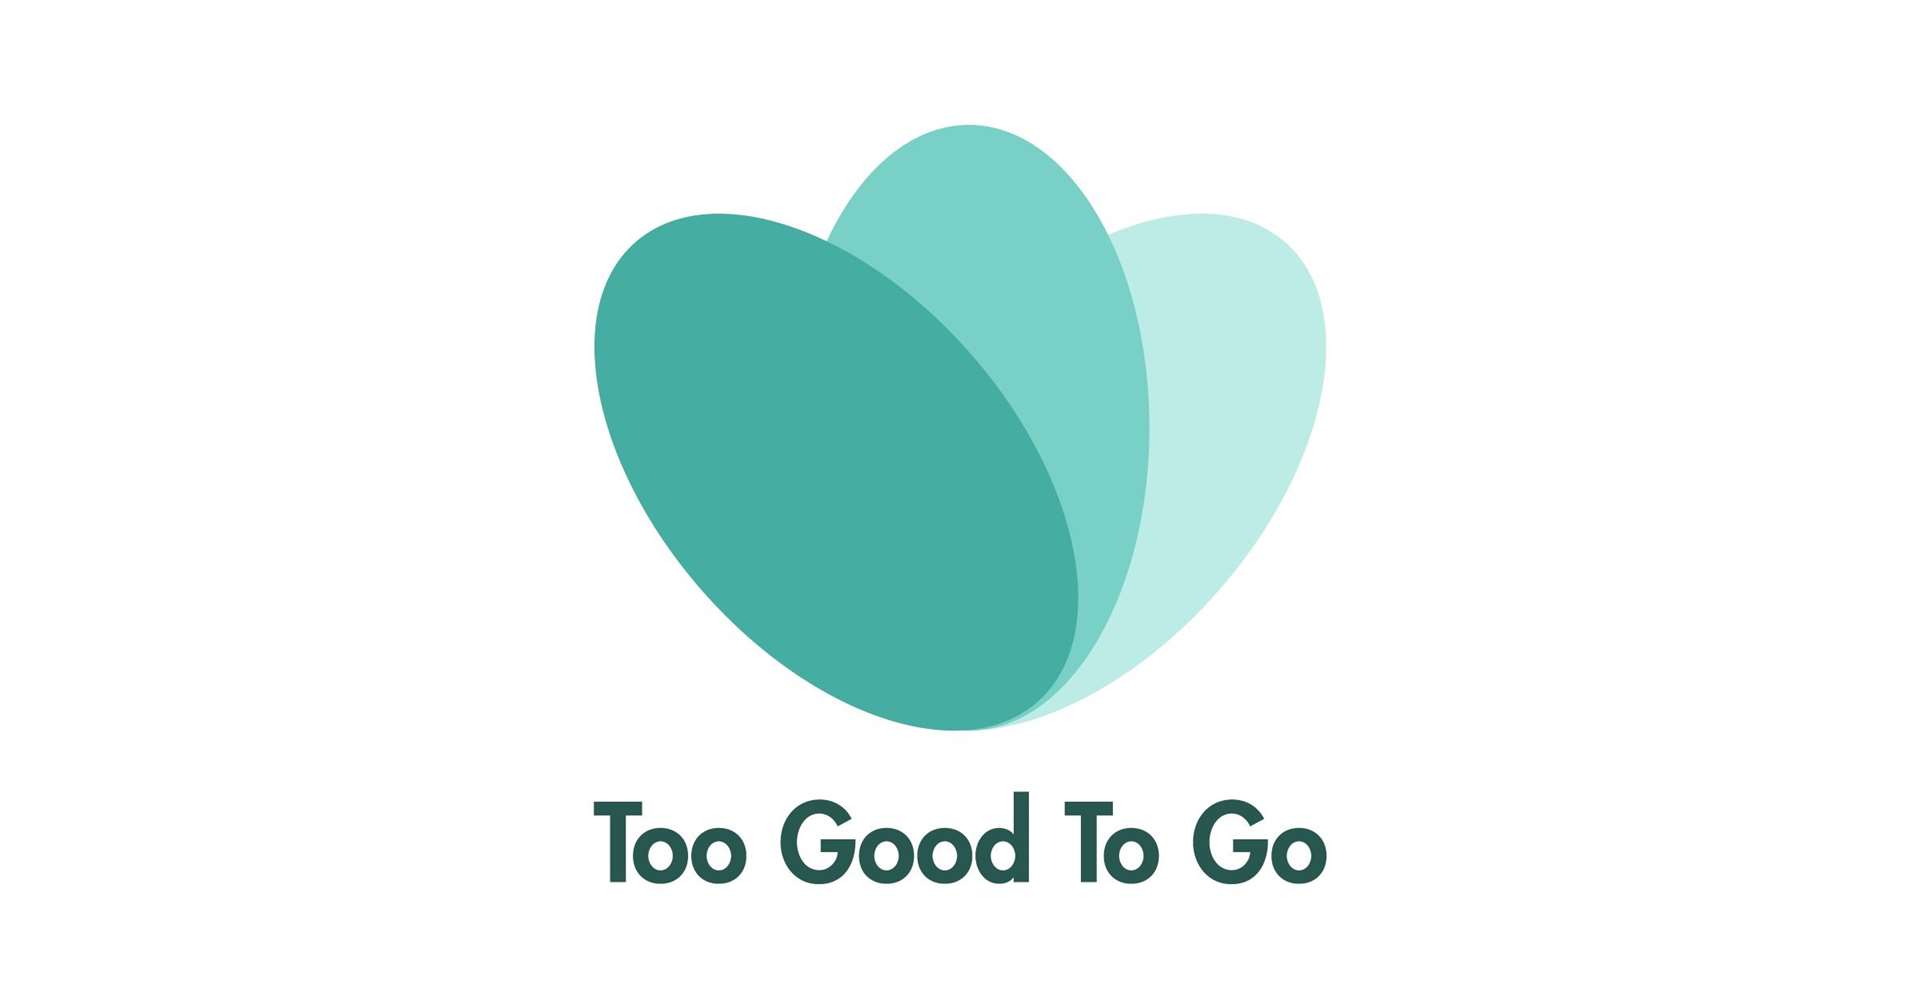 The Too Good To Go logo